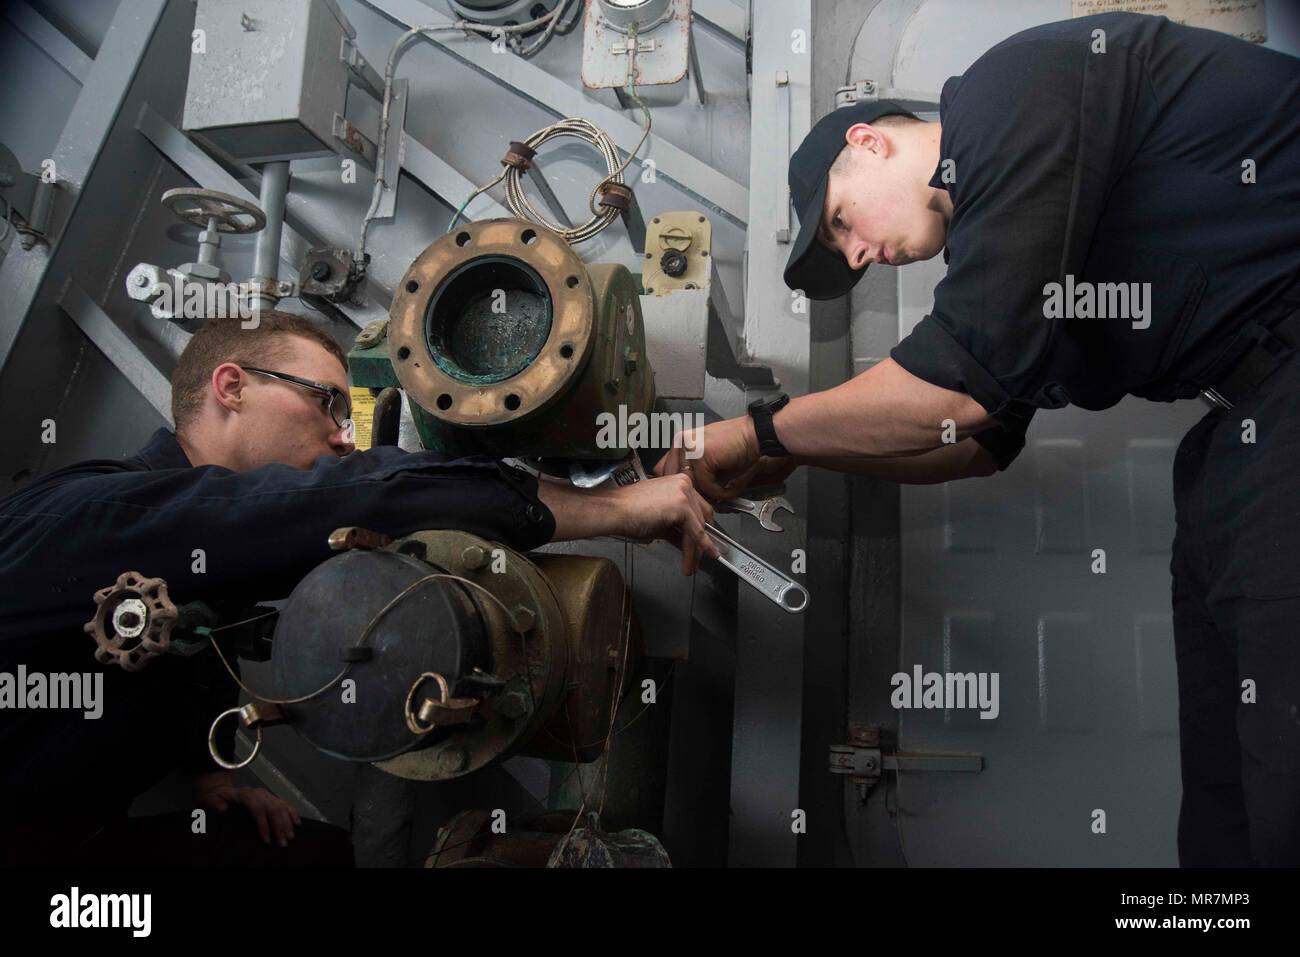 170518-N-KJ380-017  ATLANTIC OCEAN (May 18, 2017) Hull Maintenance Technician Fireman Brandon Bedwell, from Indianapolis, left, and Hull Maintenance Technician 3rd Class Joseph Becker, from Elizabethville, Penn., right, replace a collect, hold, and transfer valve on the portside boat davit aboard the aircraft carrier USS Dwight D. Eisenhower (CVN 69) (Ike). Ike is currently underway conducting engineering drills as part of the sustainment phase of the Optimized Fleet Response Plan (OFRP). (U.S. Navy photo by Seaman Neo Greene III) Stock Photo